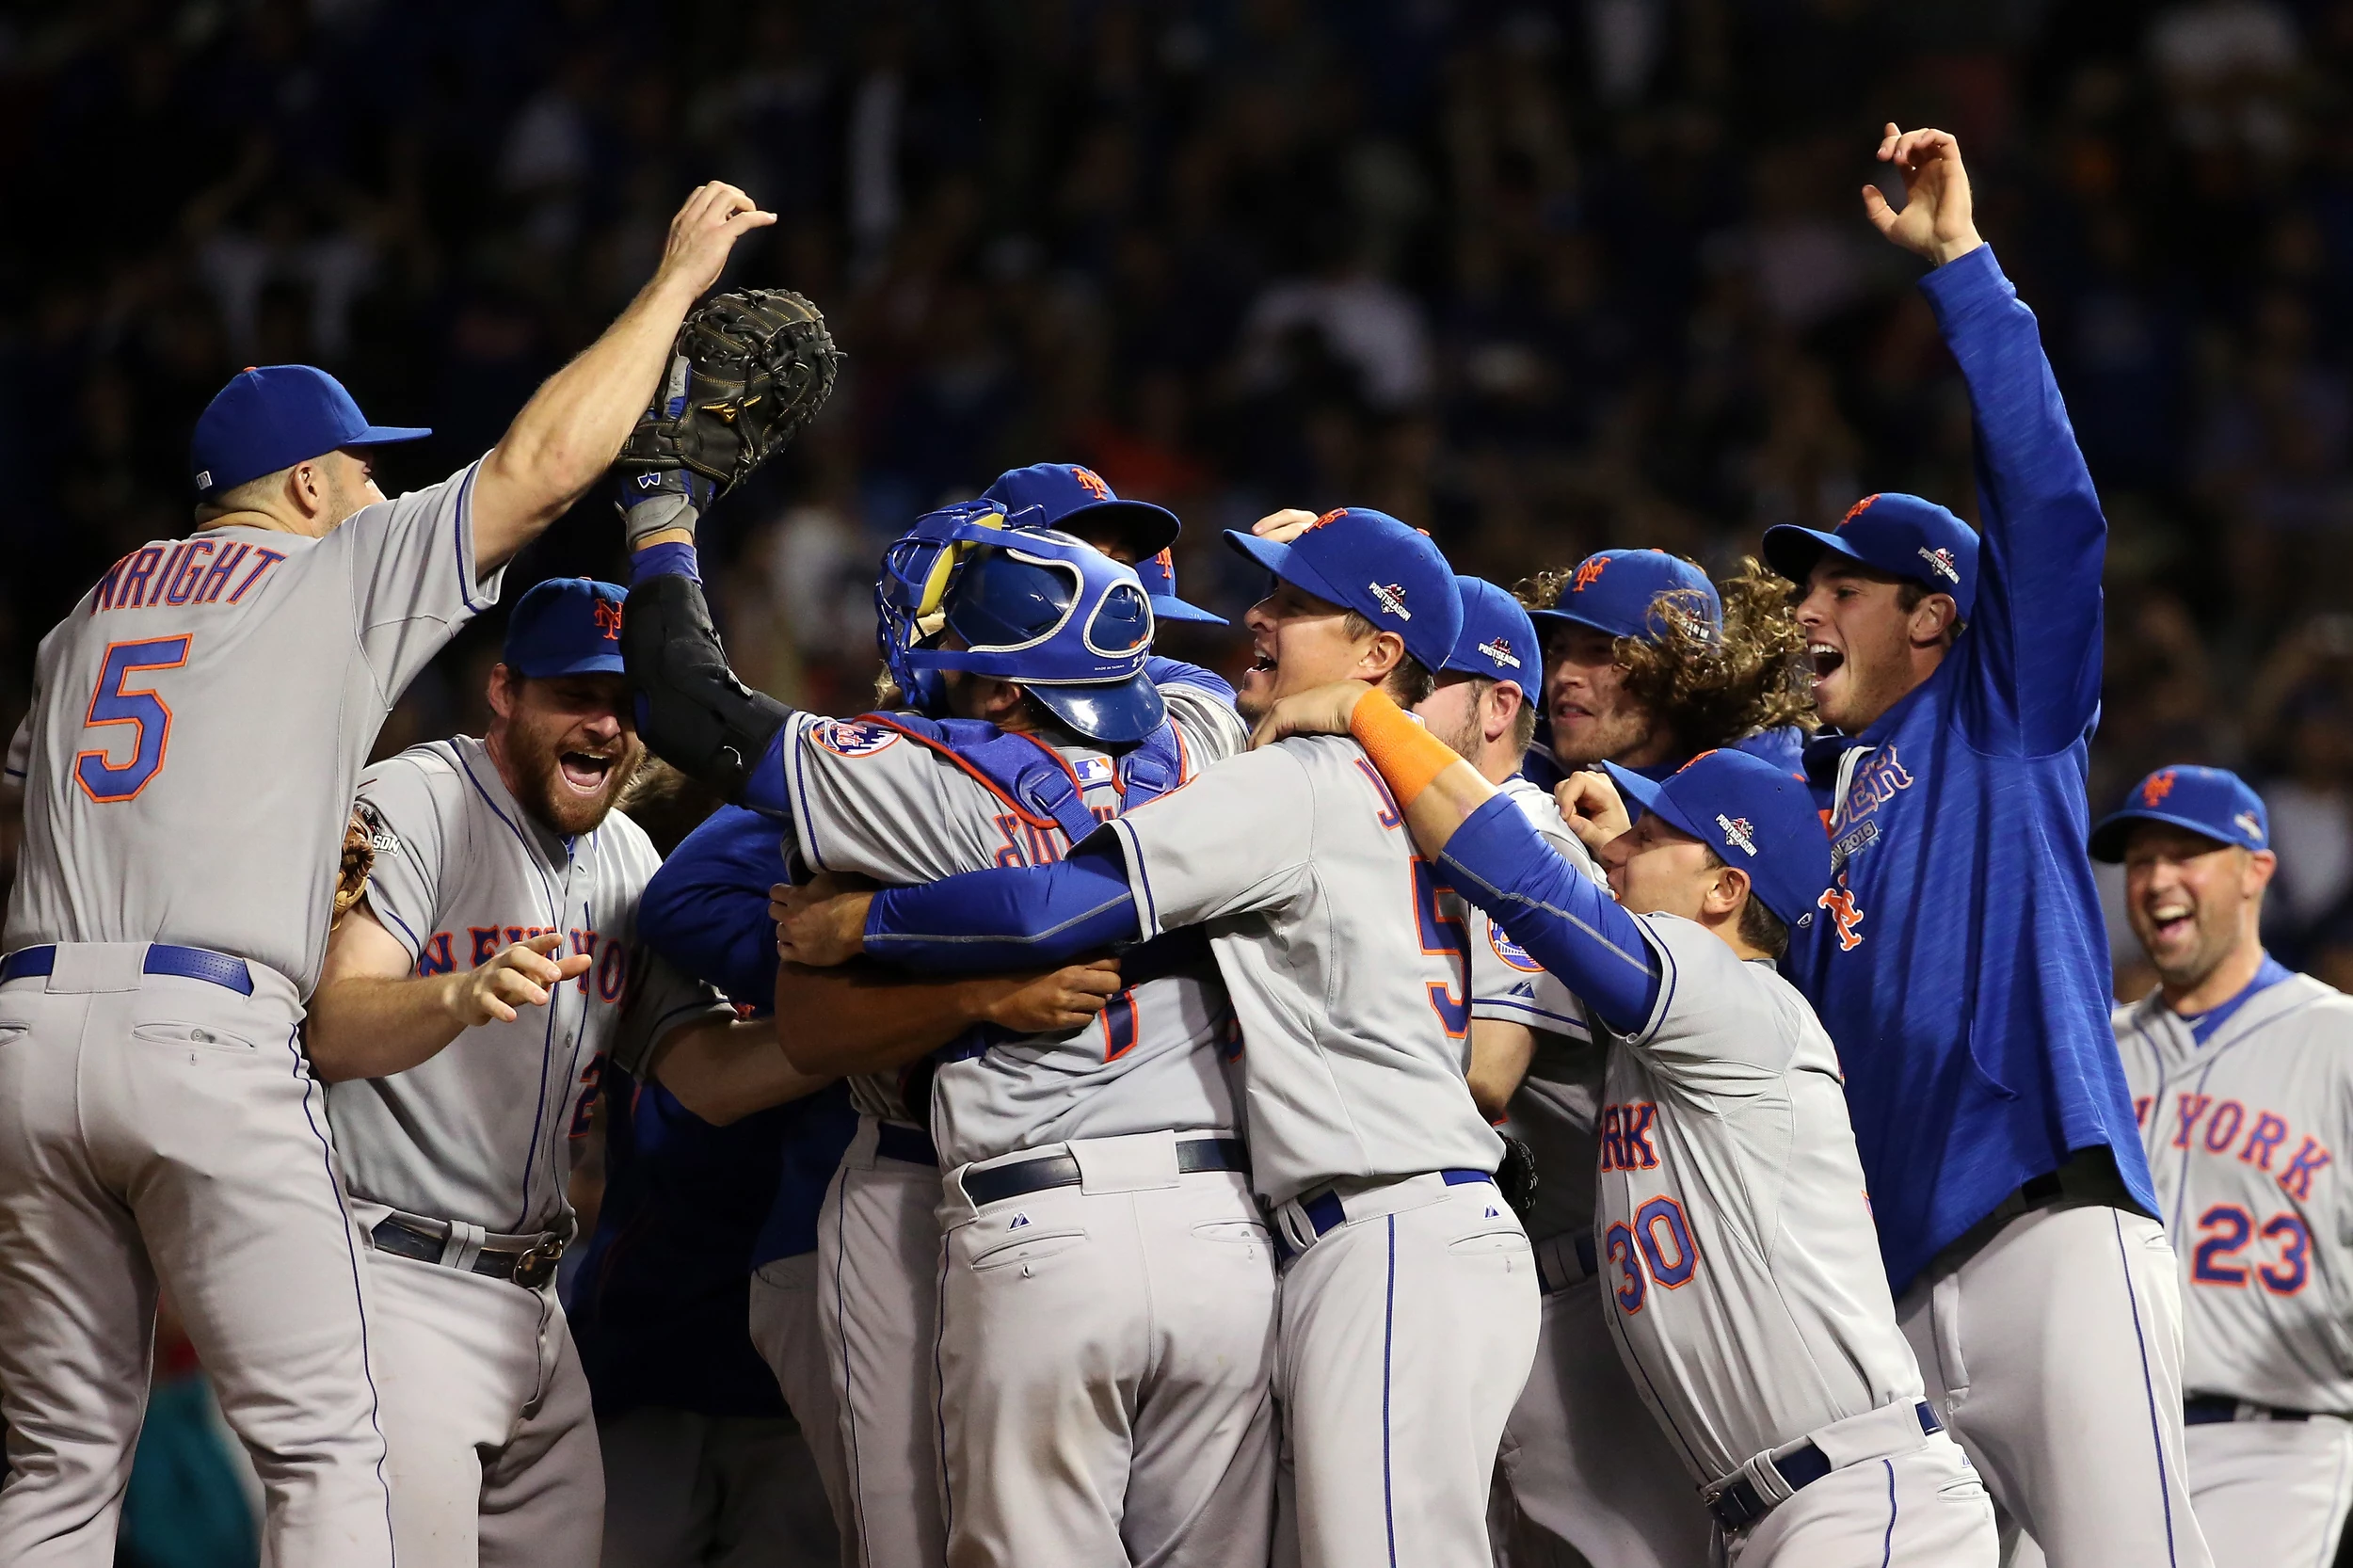 The New York Mets Clinch 2015 NLCS, Advance to First World Series